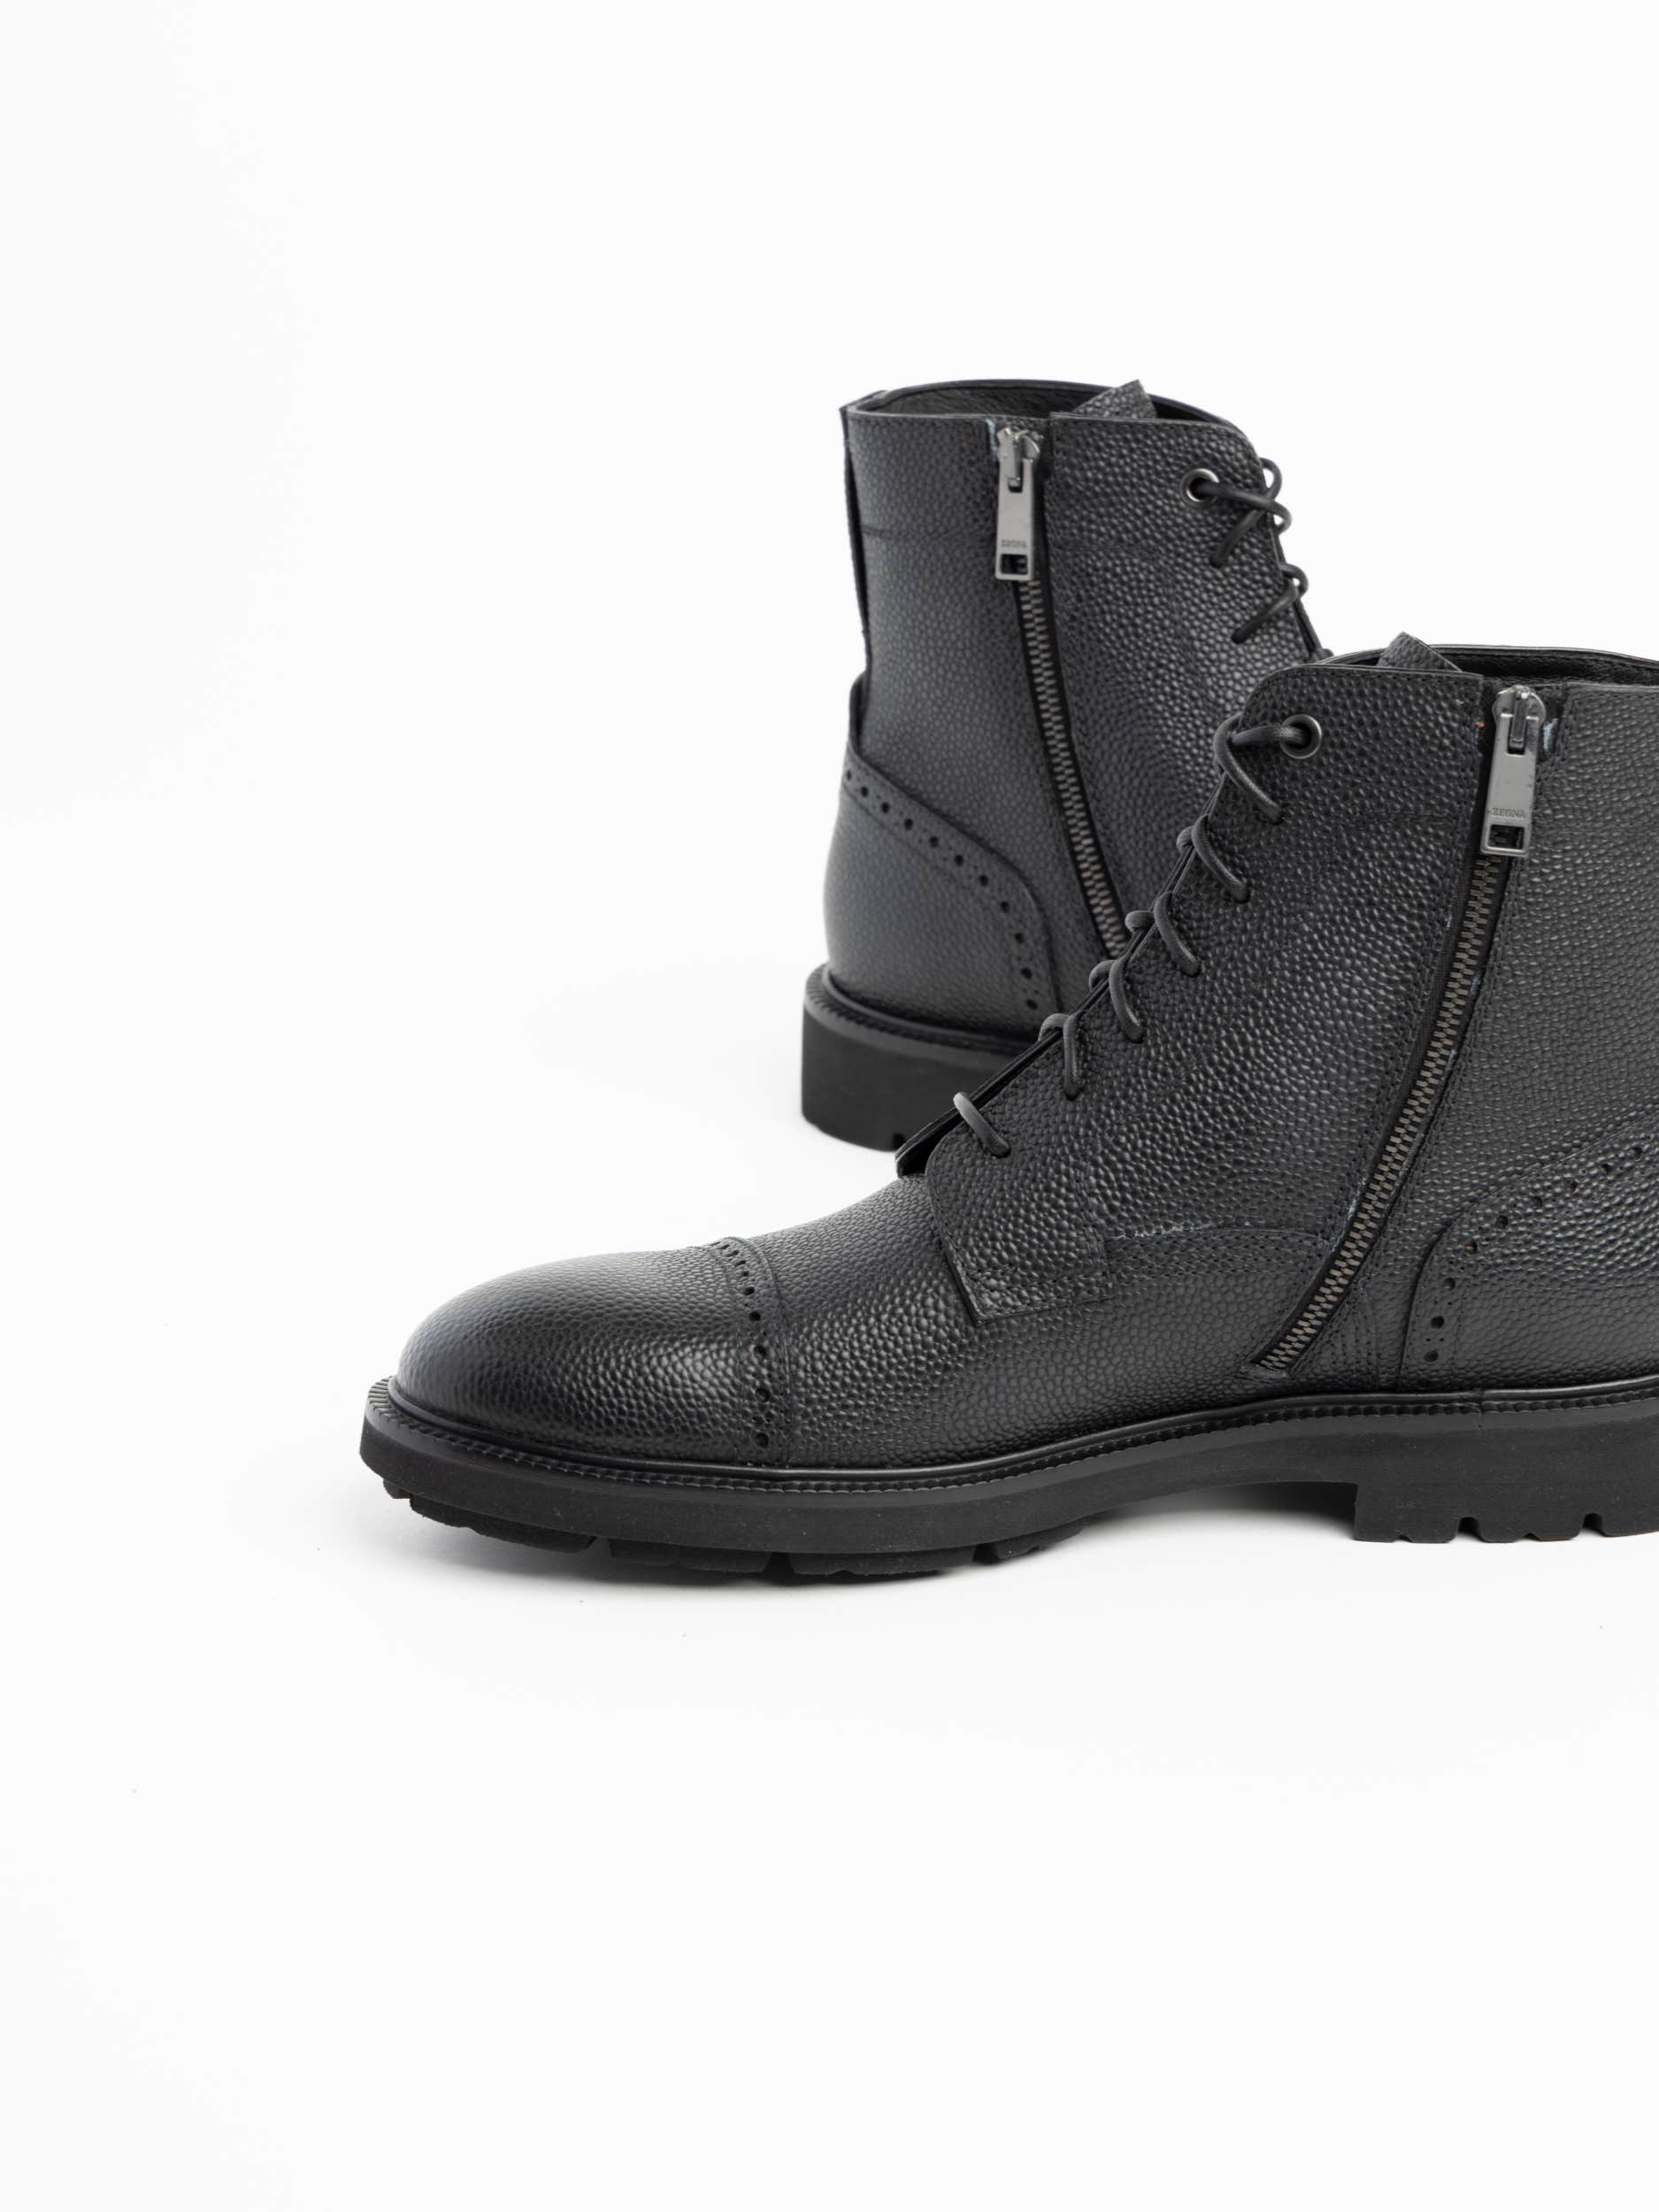 Black Leather Aosta Boots